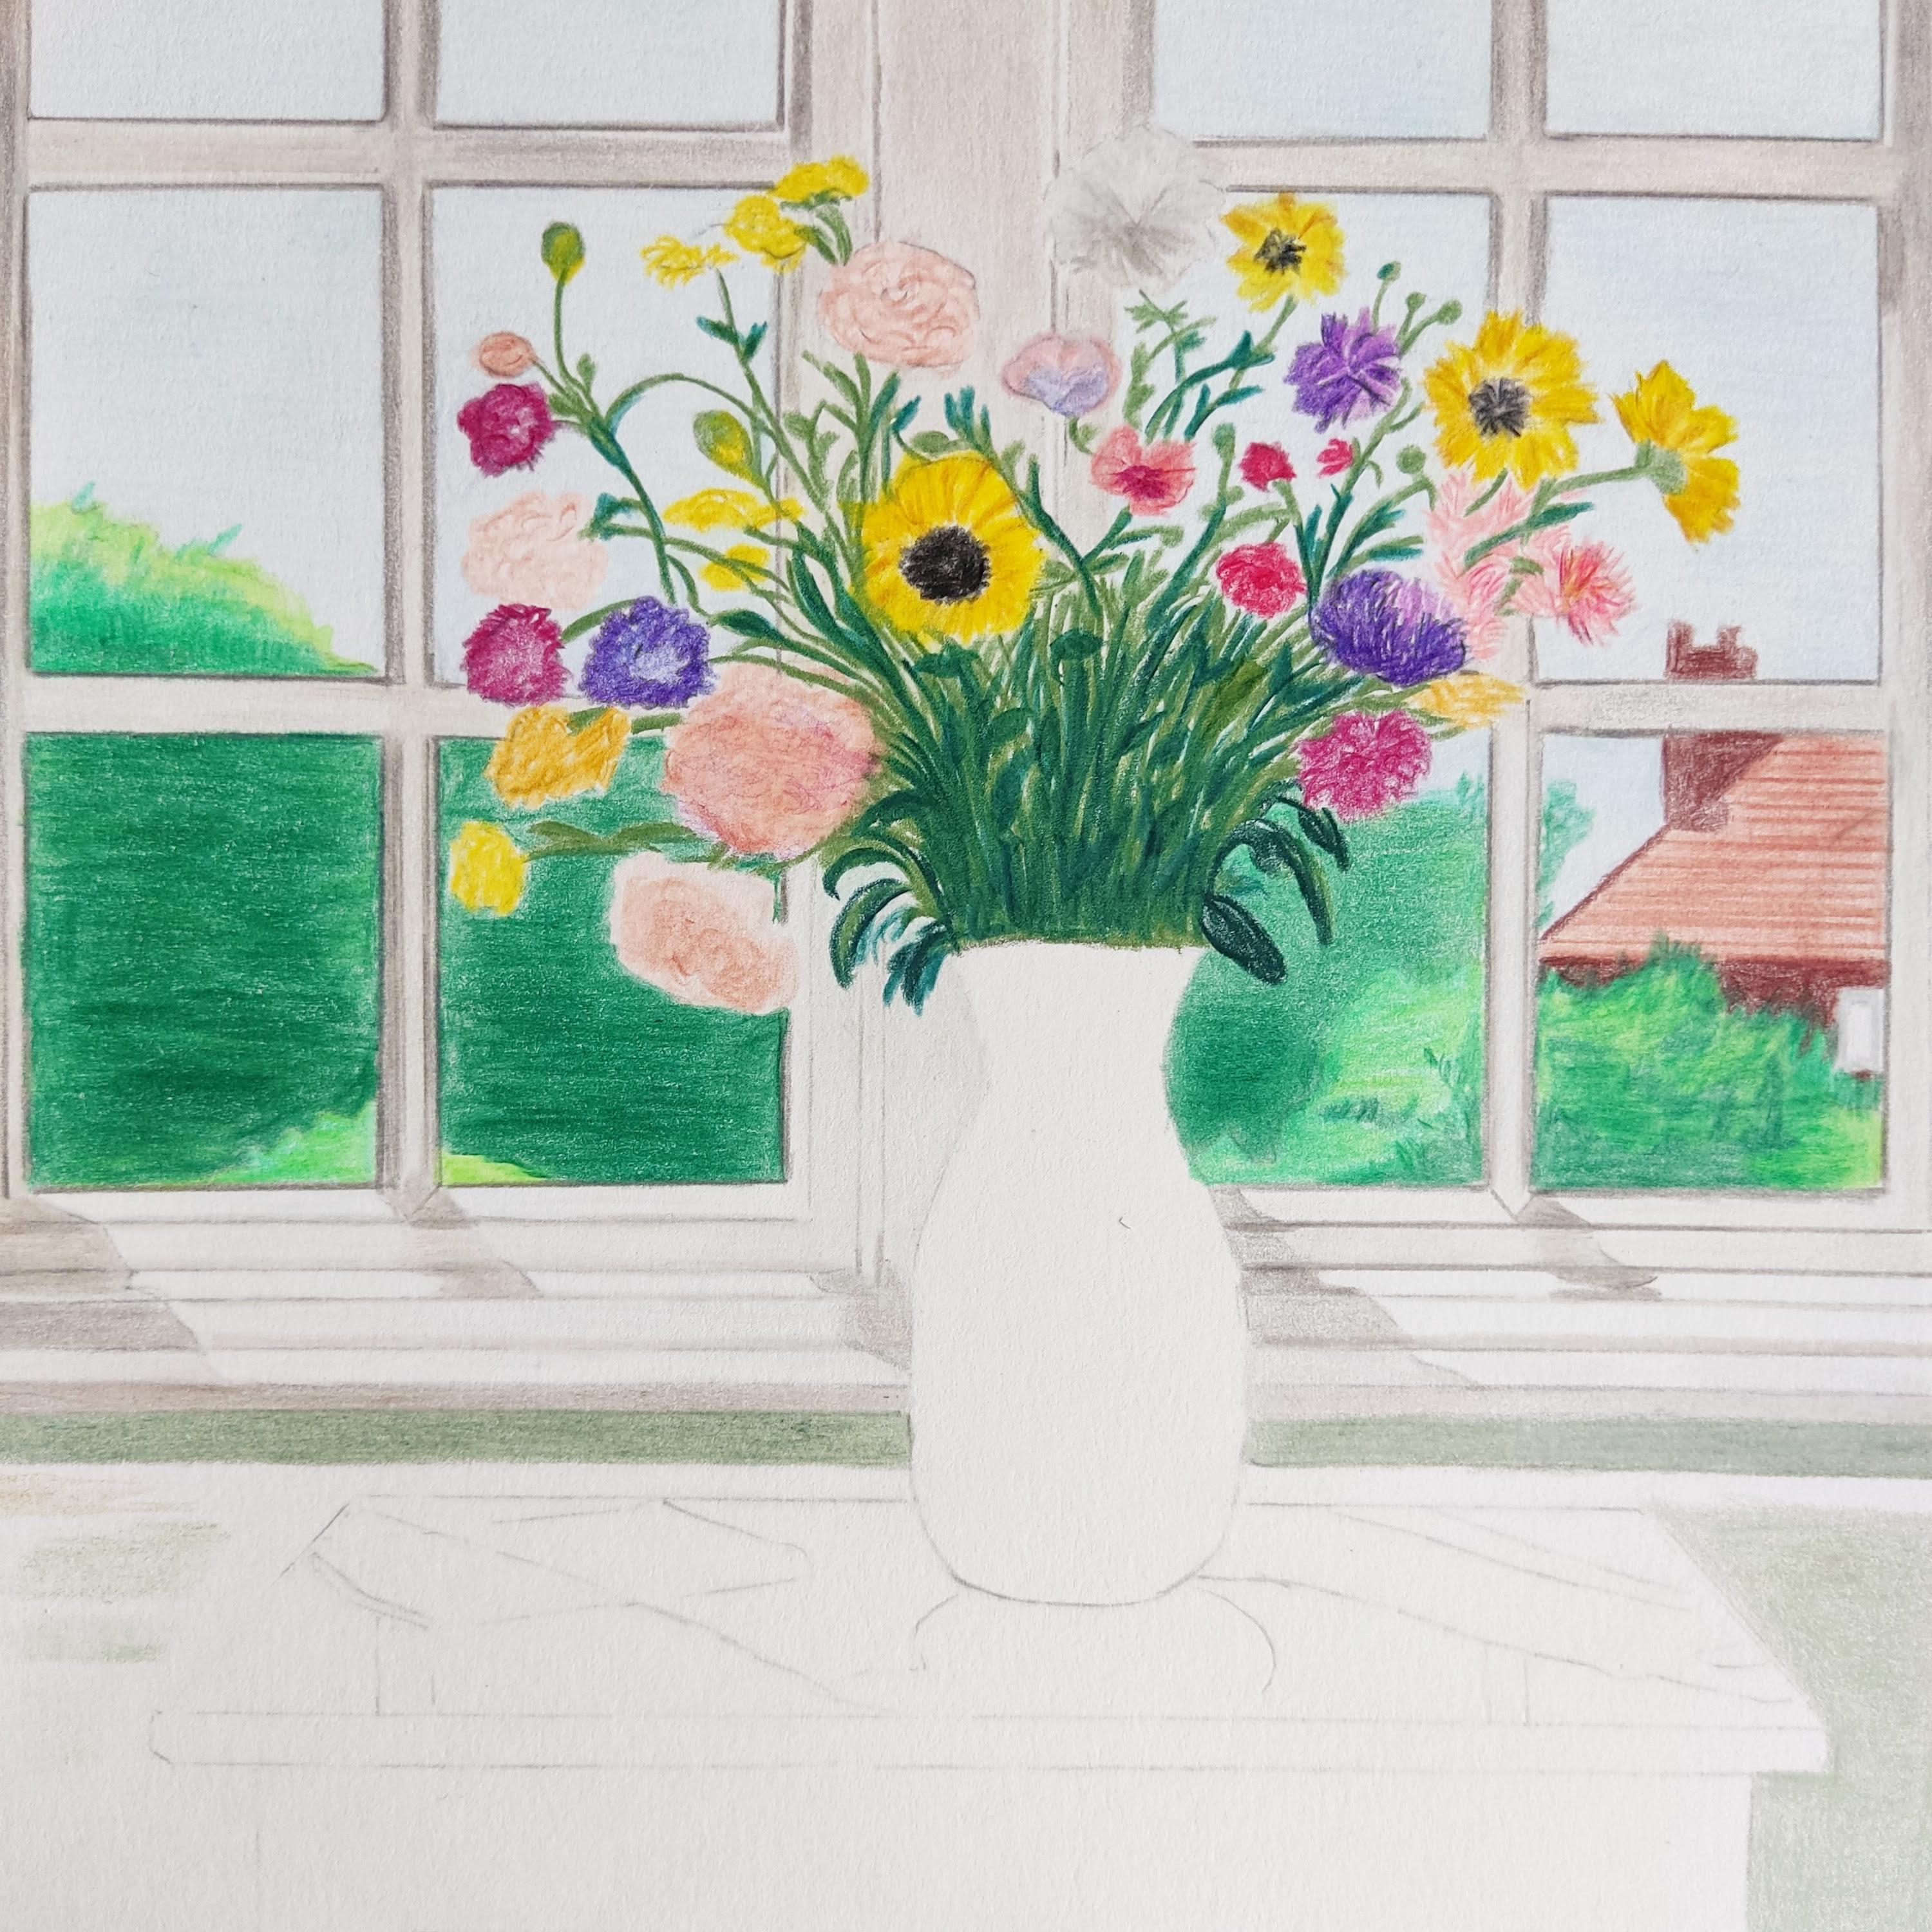 News From a Faraway Land, Original Drawing, Interior Scene, Vase, flowers For Sale 5